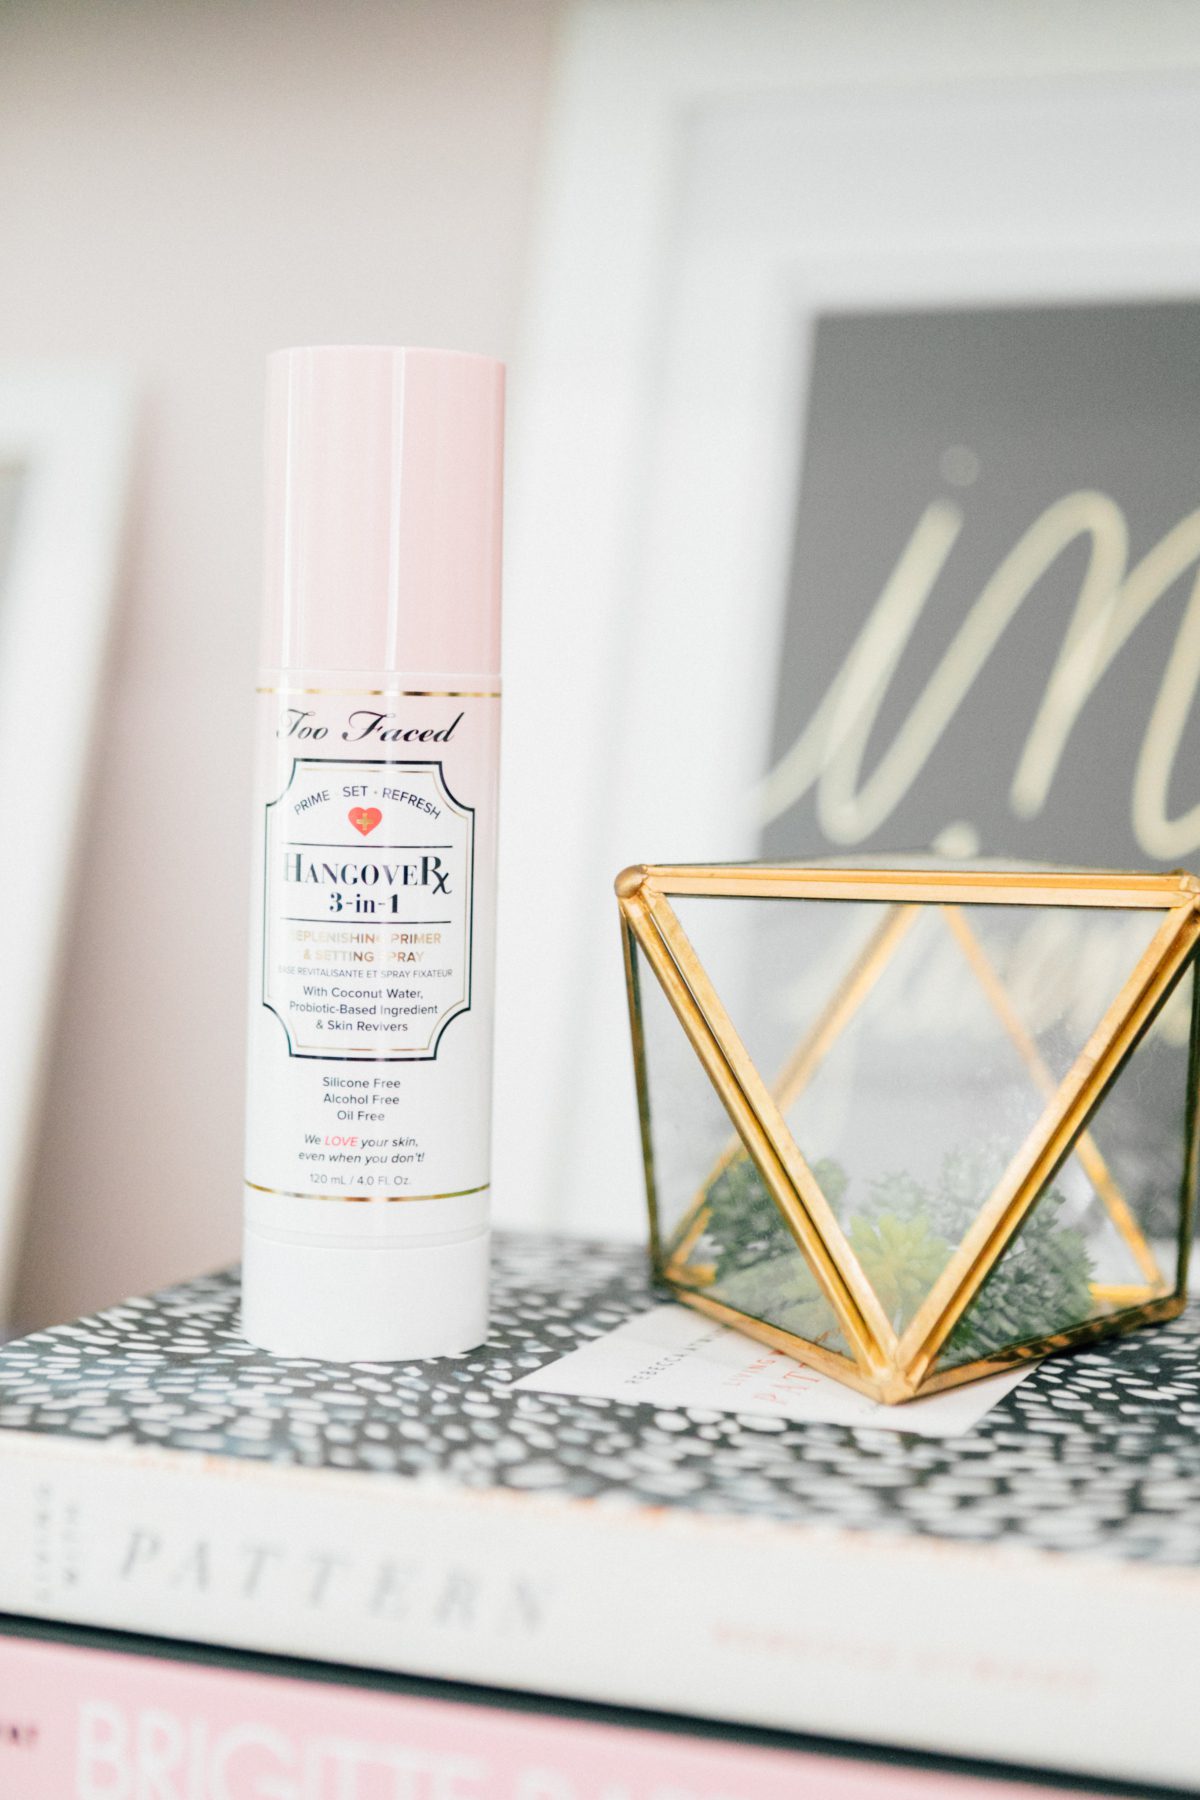 Too Faced Hangover Rx 3-in-1 Replenishing Primer & Setting Spray: